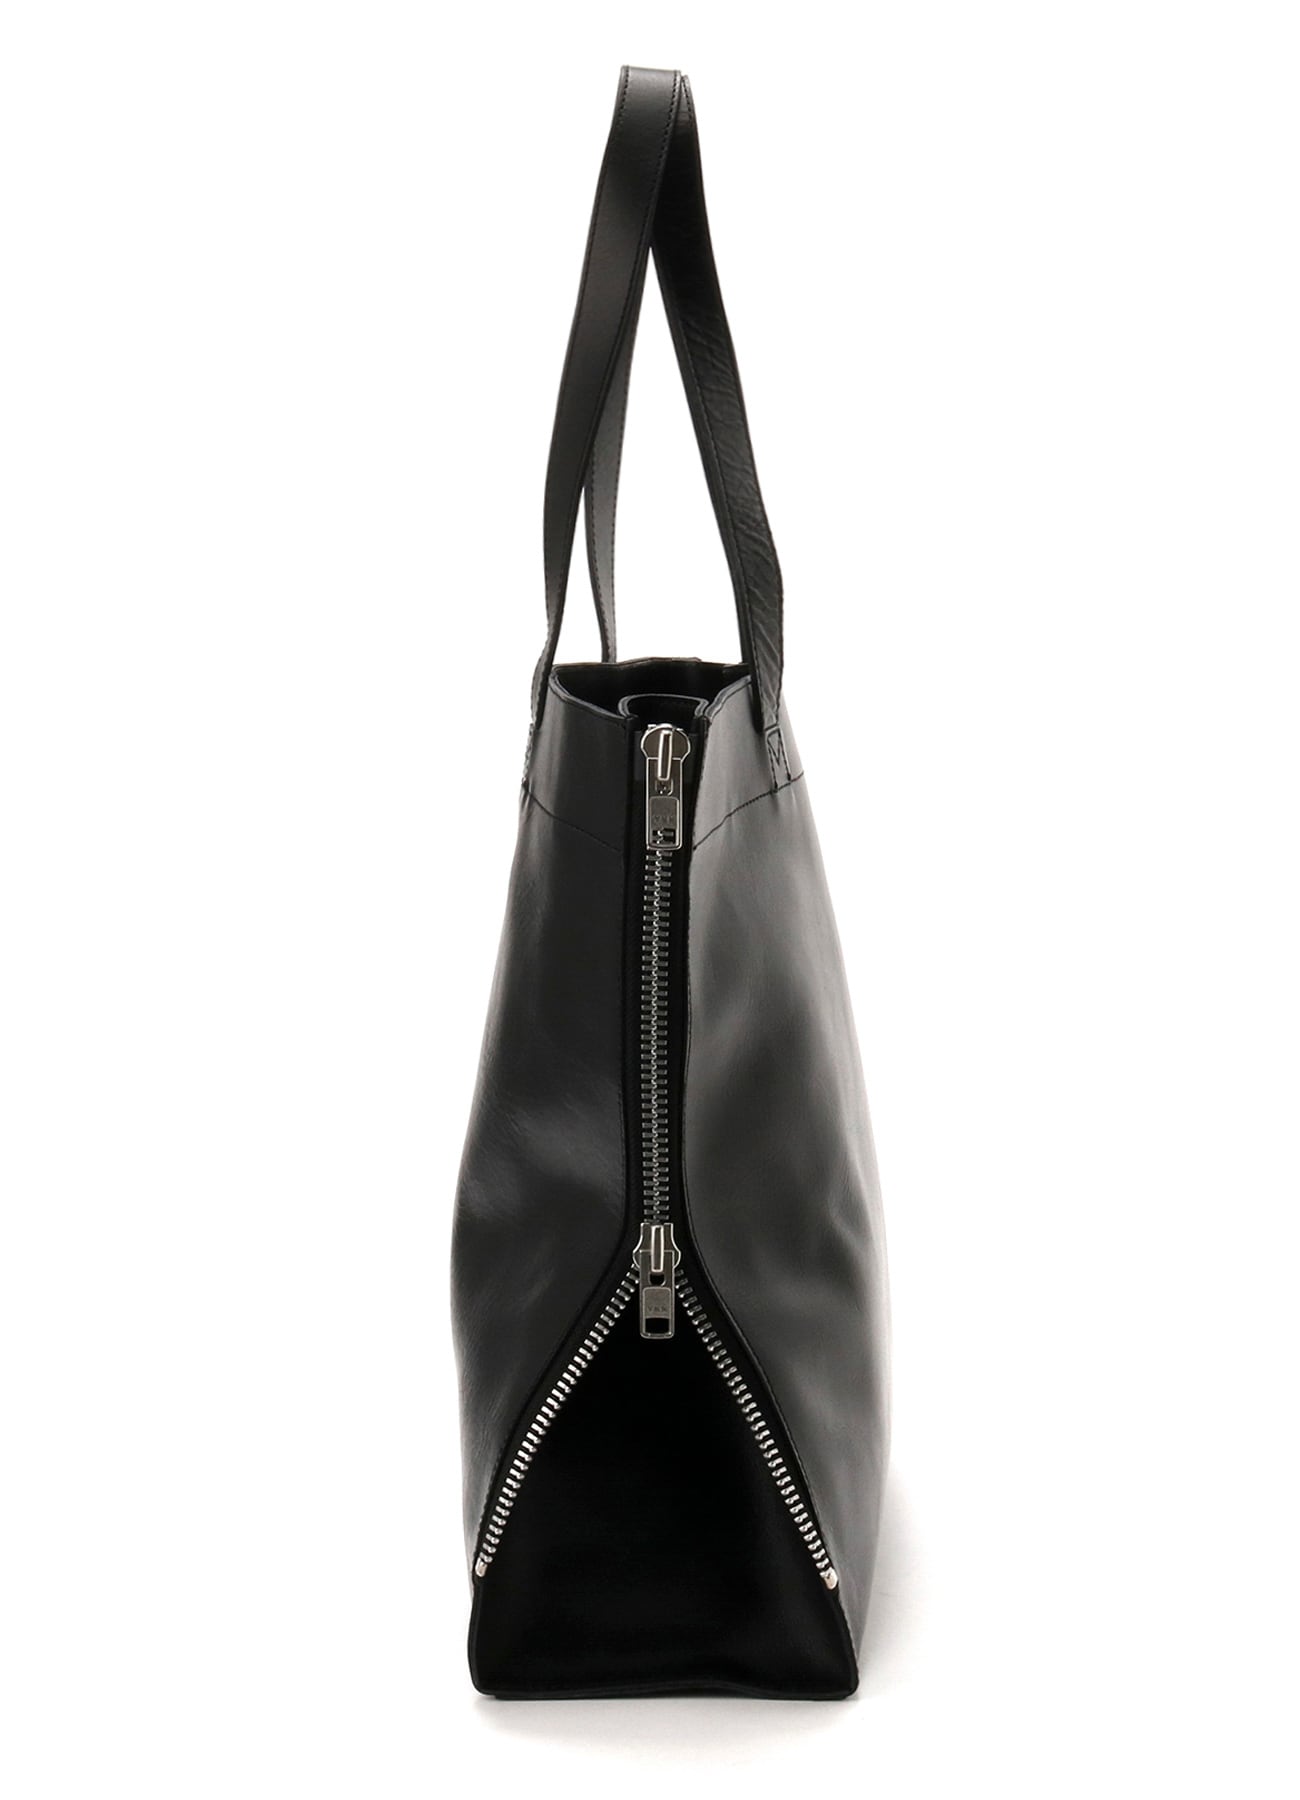 PULL UP LEATHER TOTE BAG